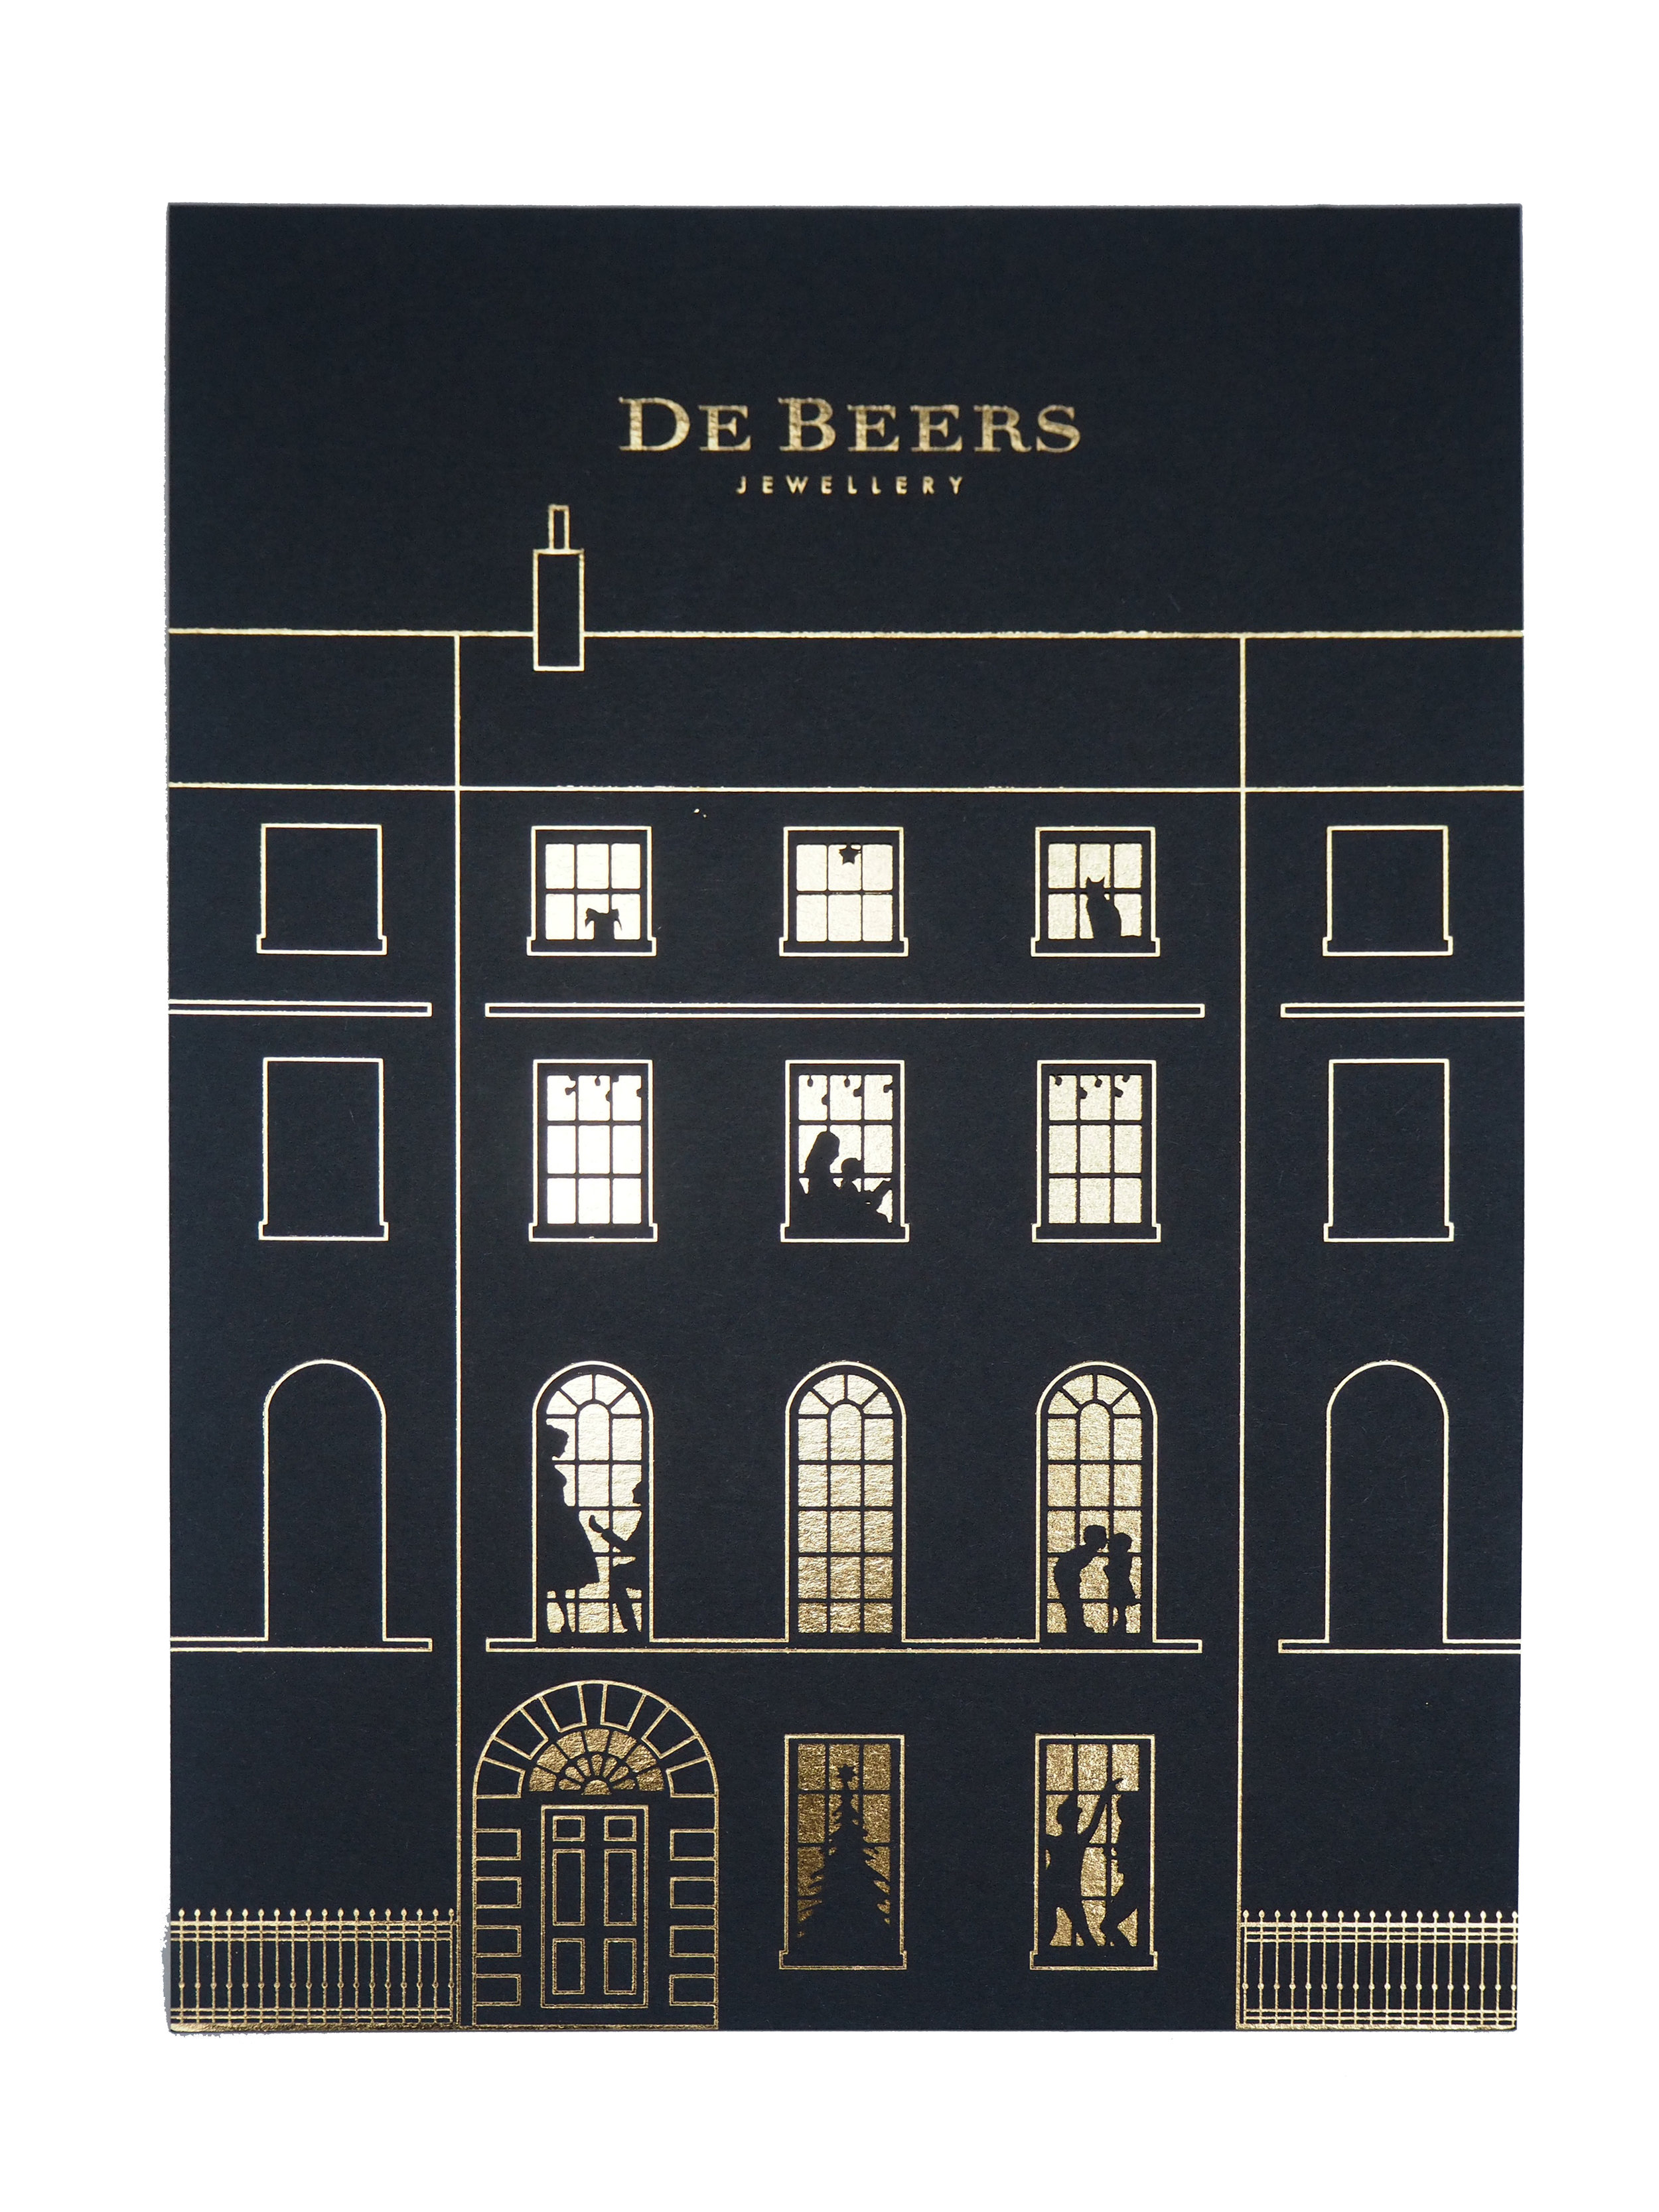 Home for Christmas for De Beers by HWVisual